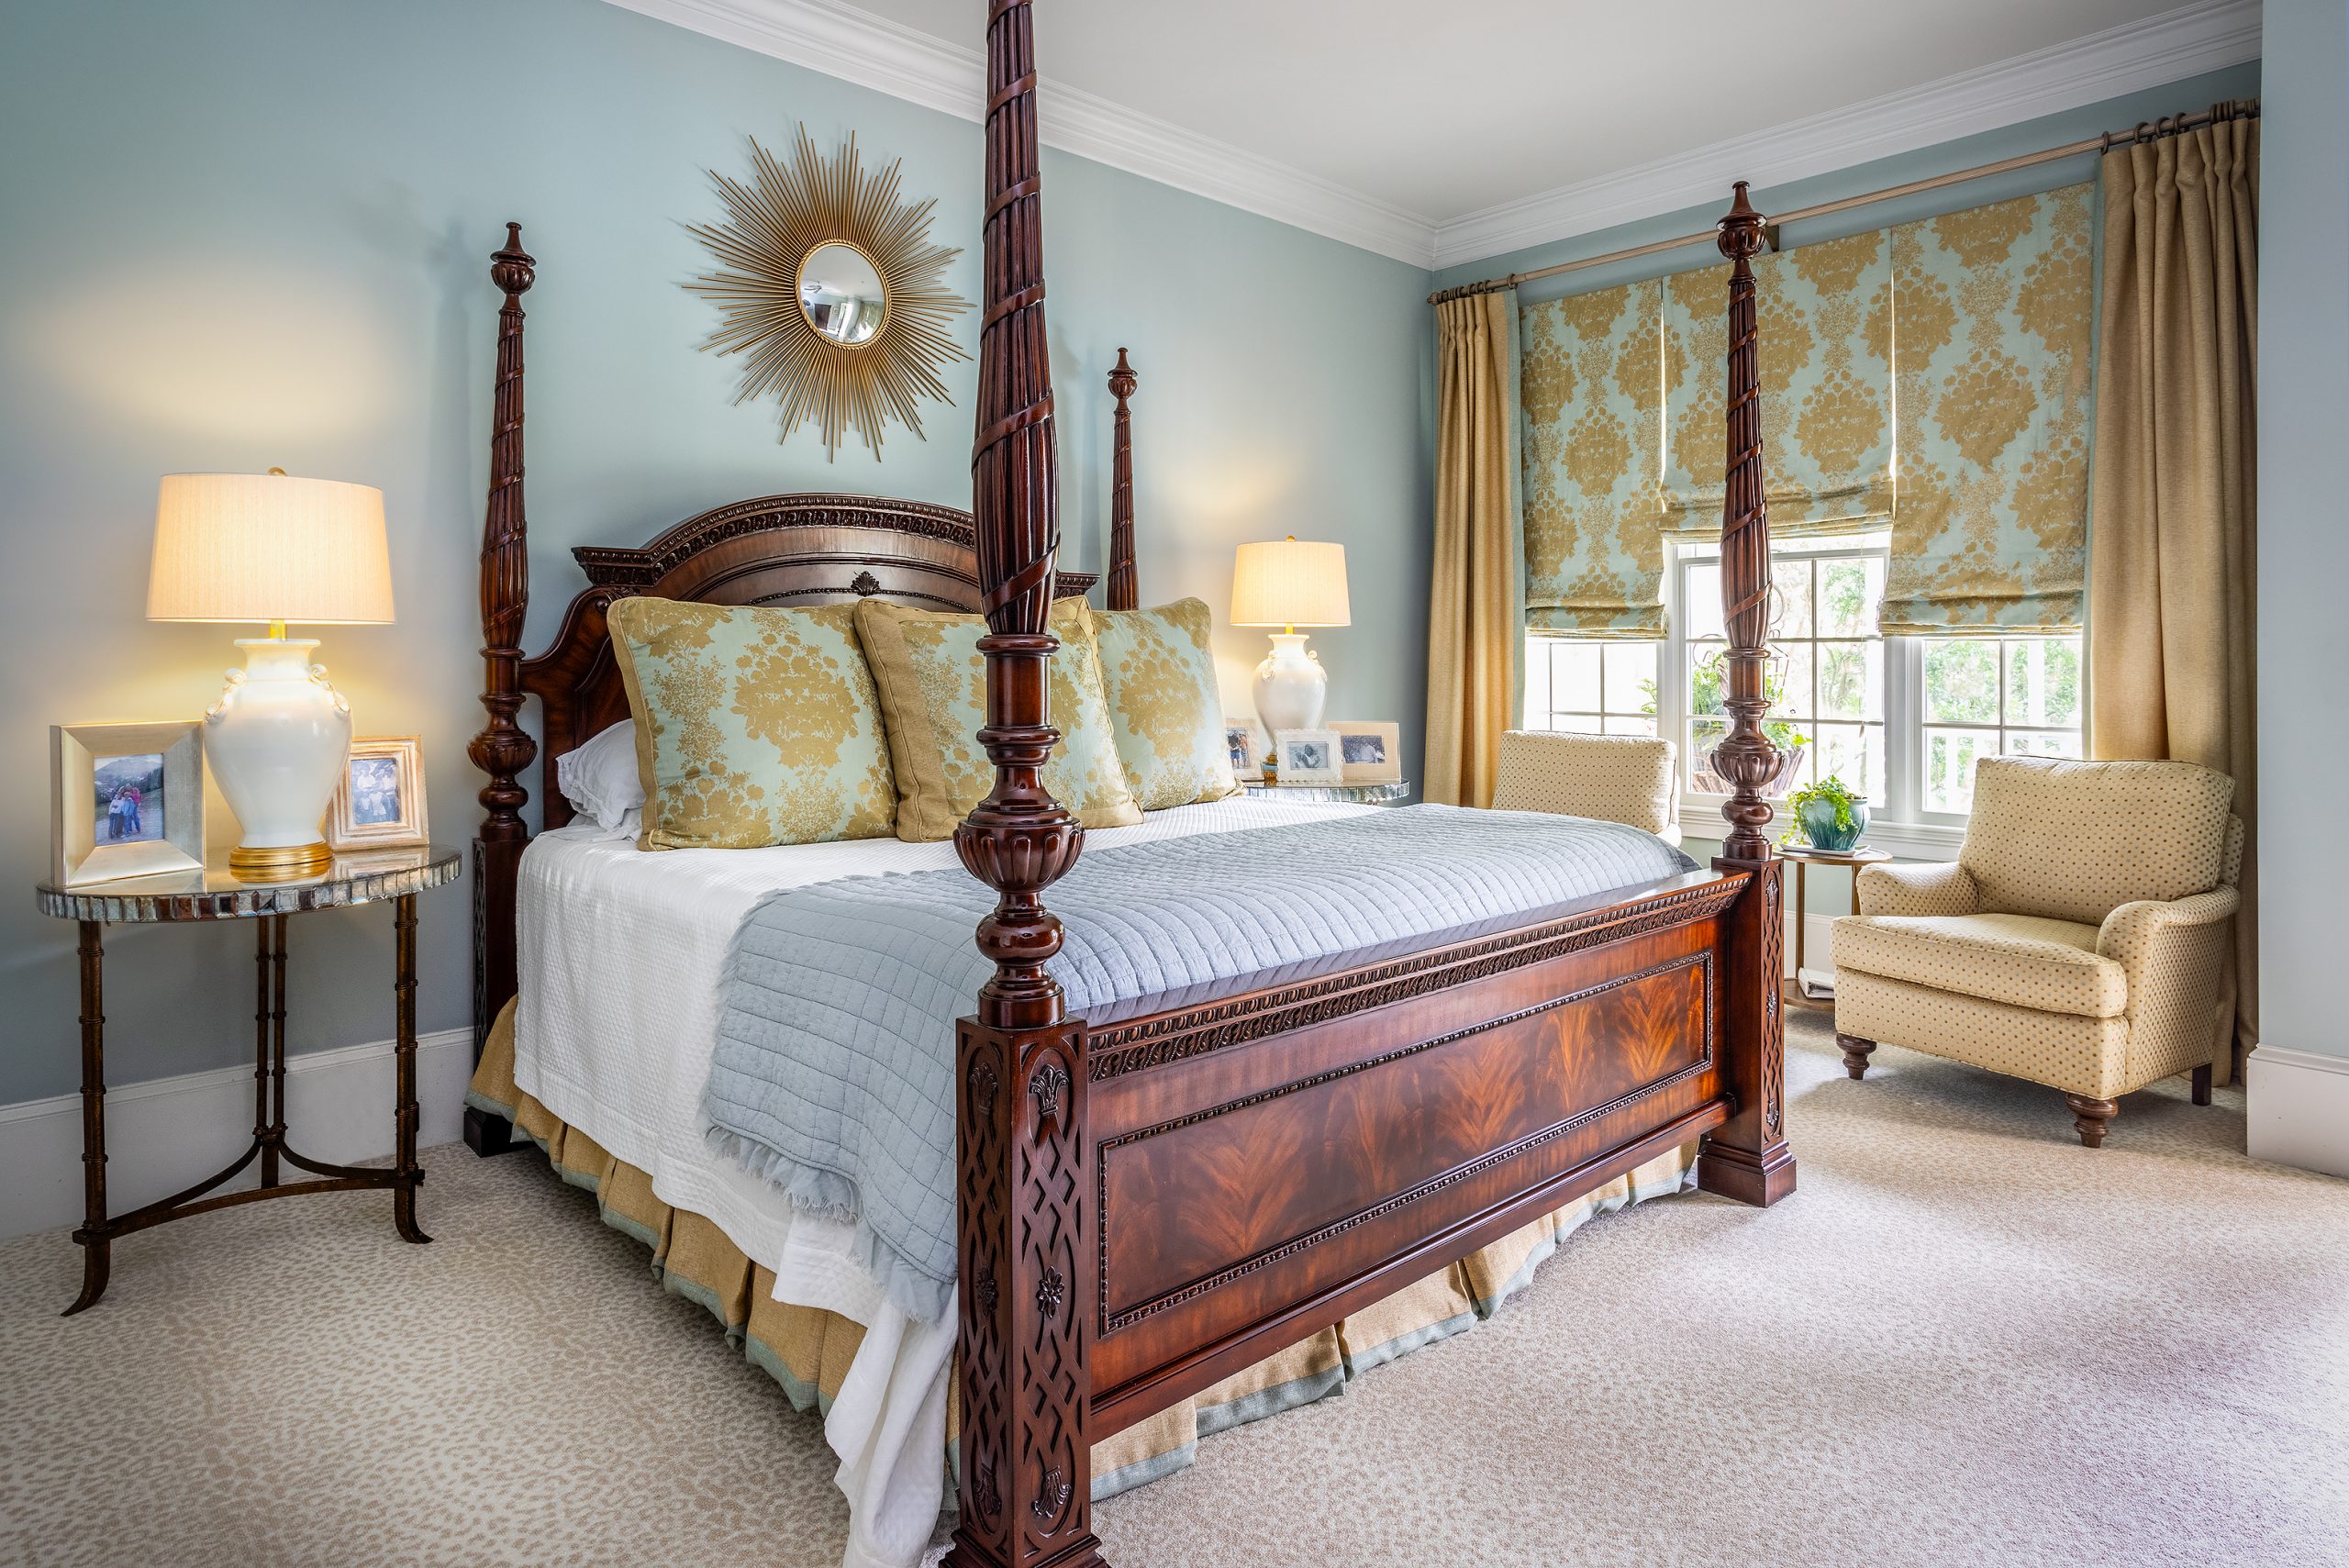 The serene blue and gold master bedroom rests on a cream leopard print carpet. A comfortable seating area is backed by windows overlooking the backyard, and the room has its own private door to enjoy the back porch. 